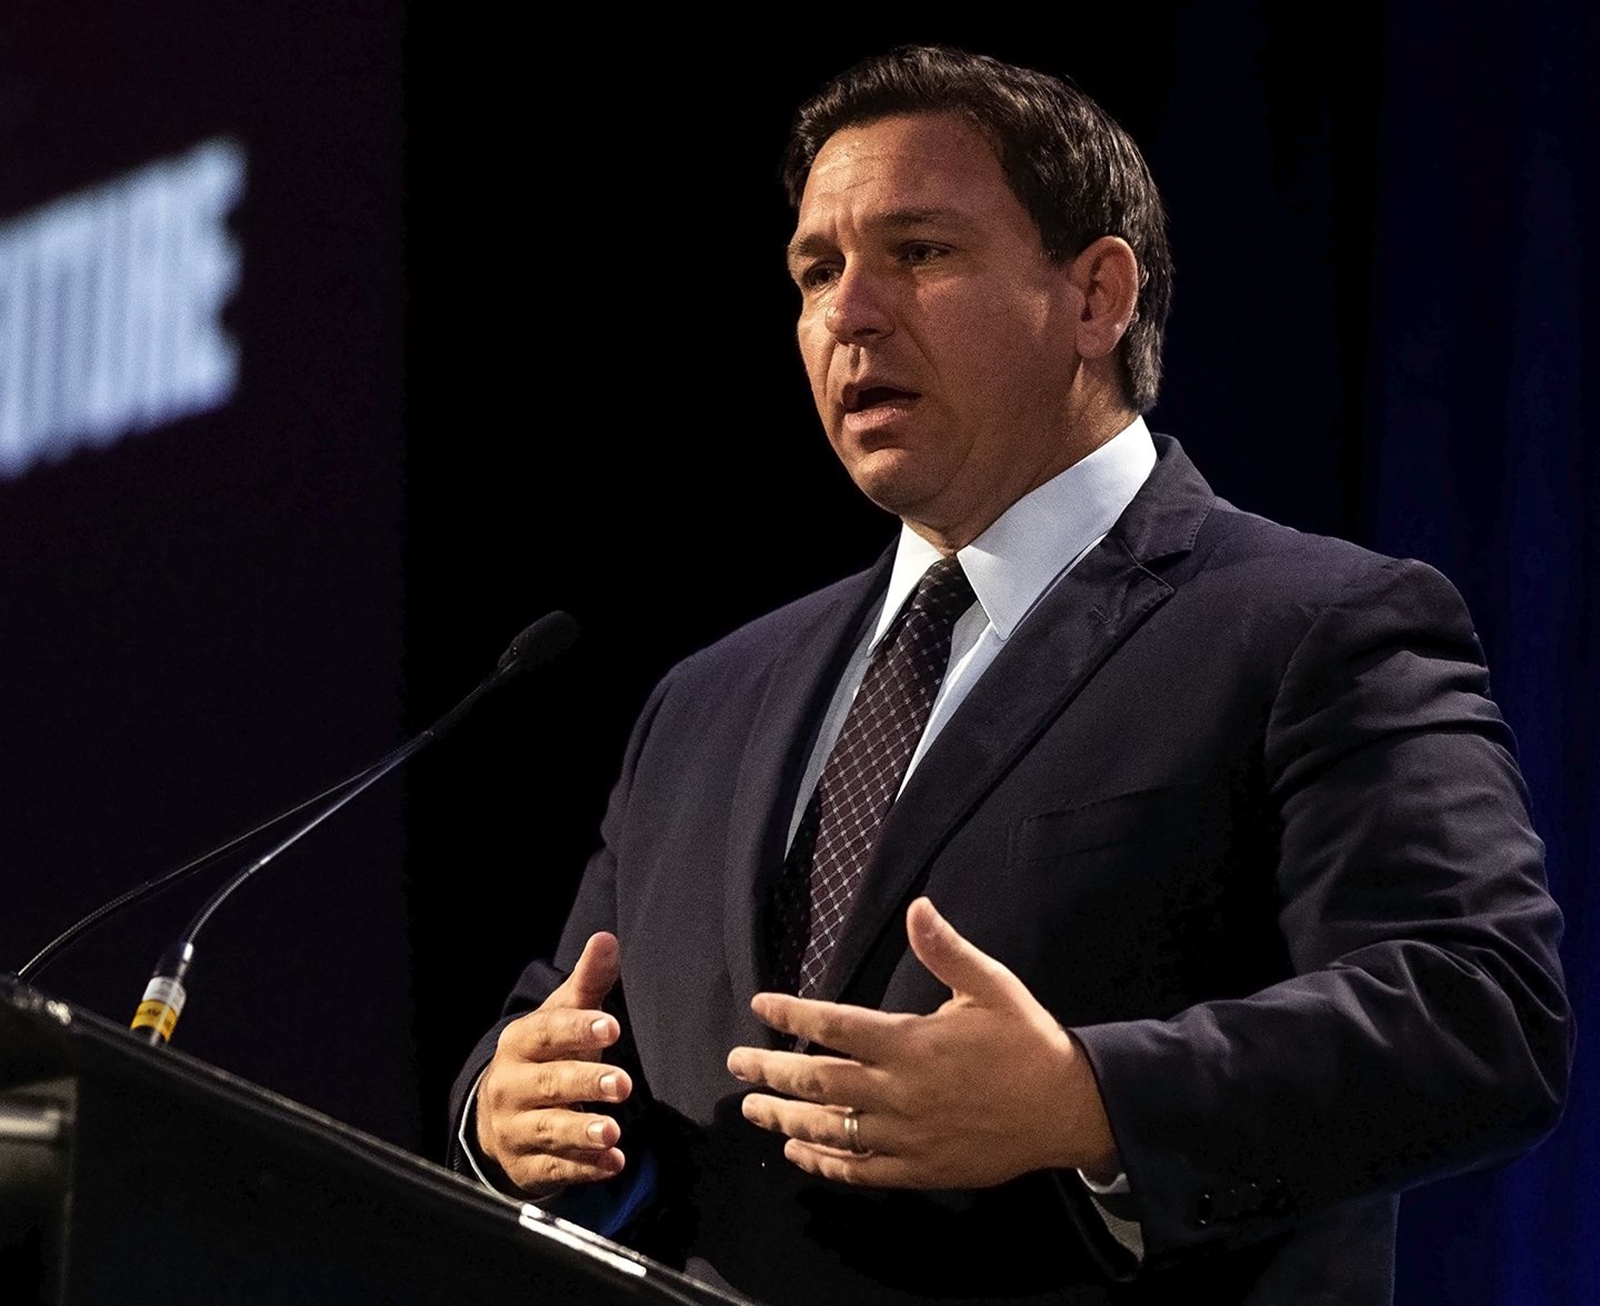 Illinois Governor Debate Schedule 2022 Desantis Files For Reelection In 2022 Florida Governor Race